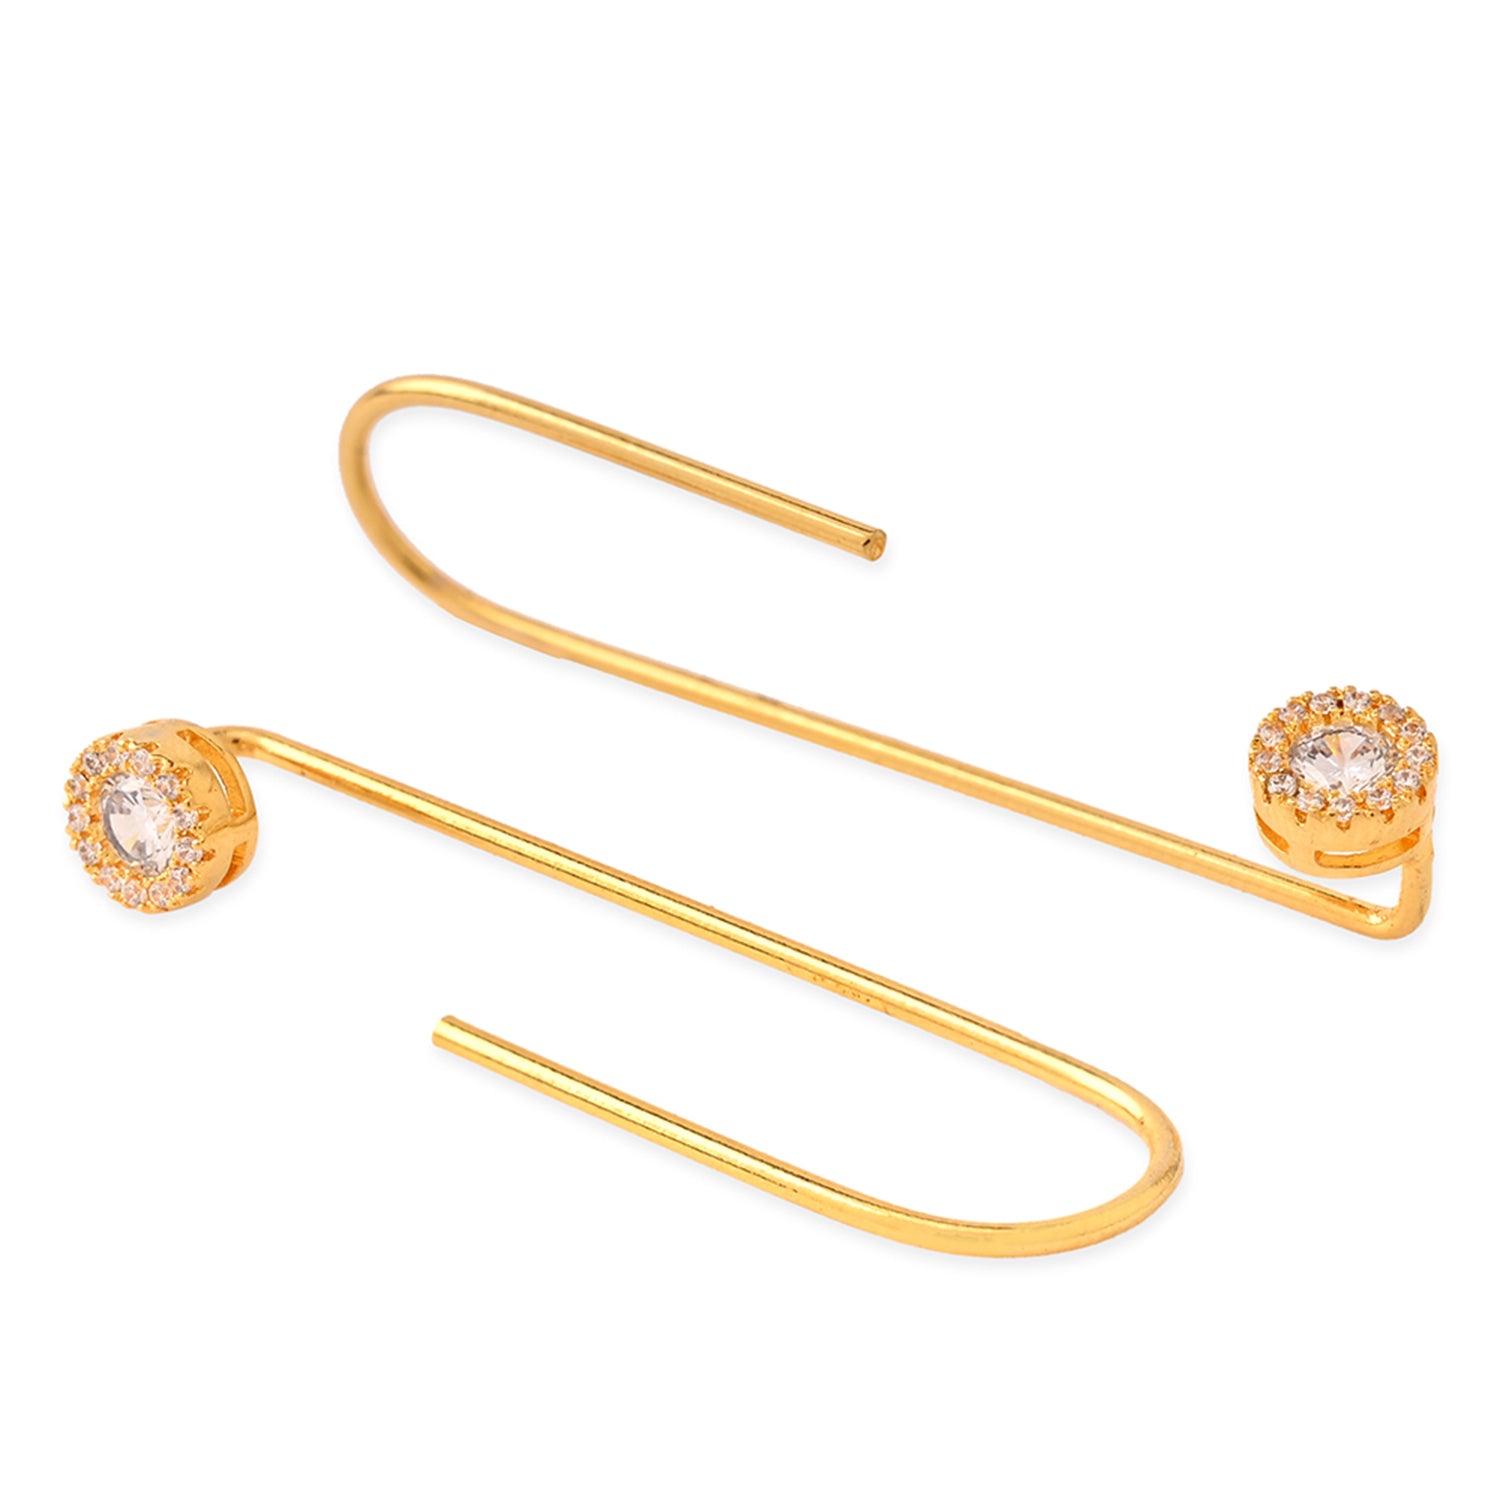 Gold Plated CZ Classy Earrings